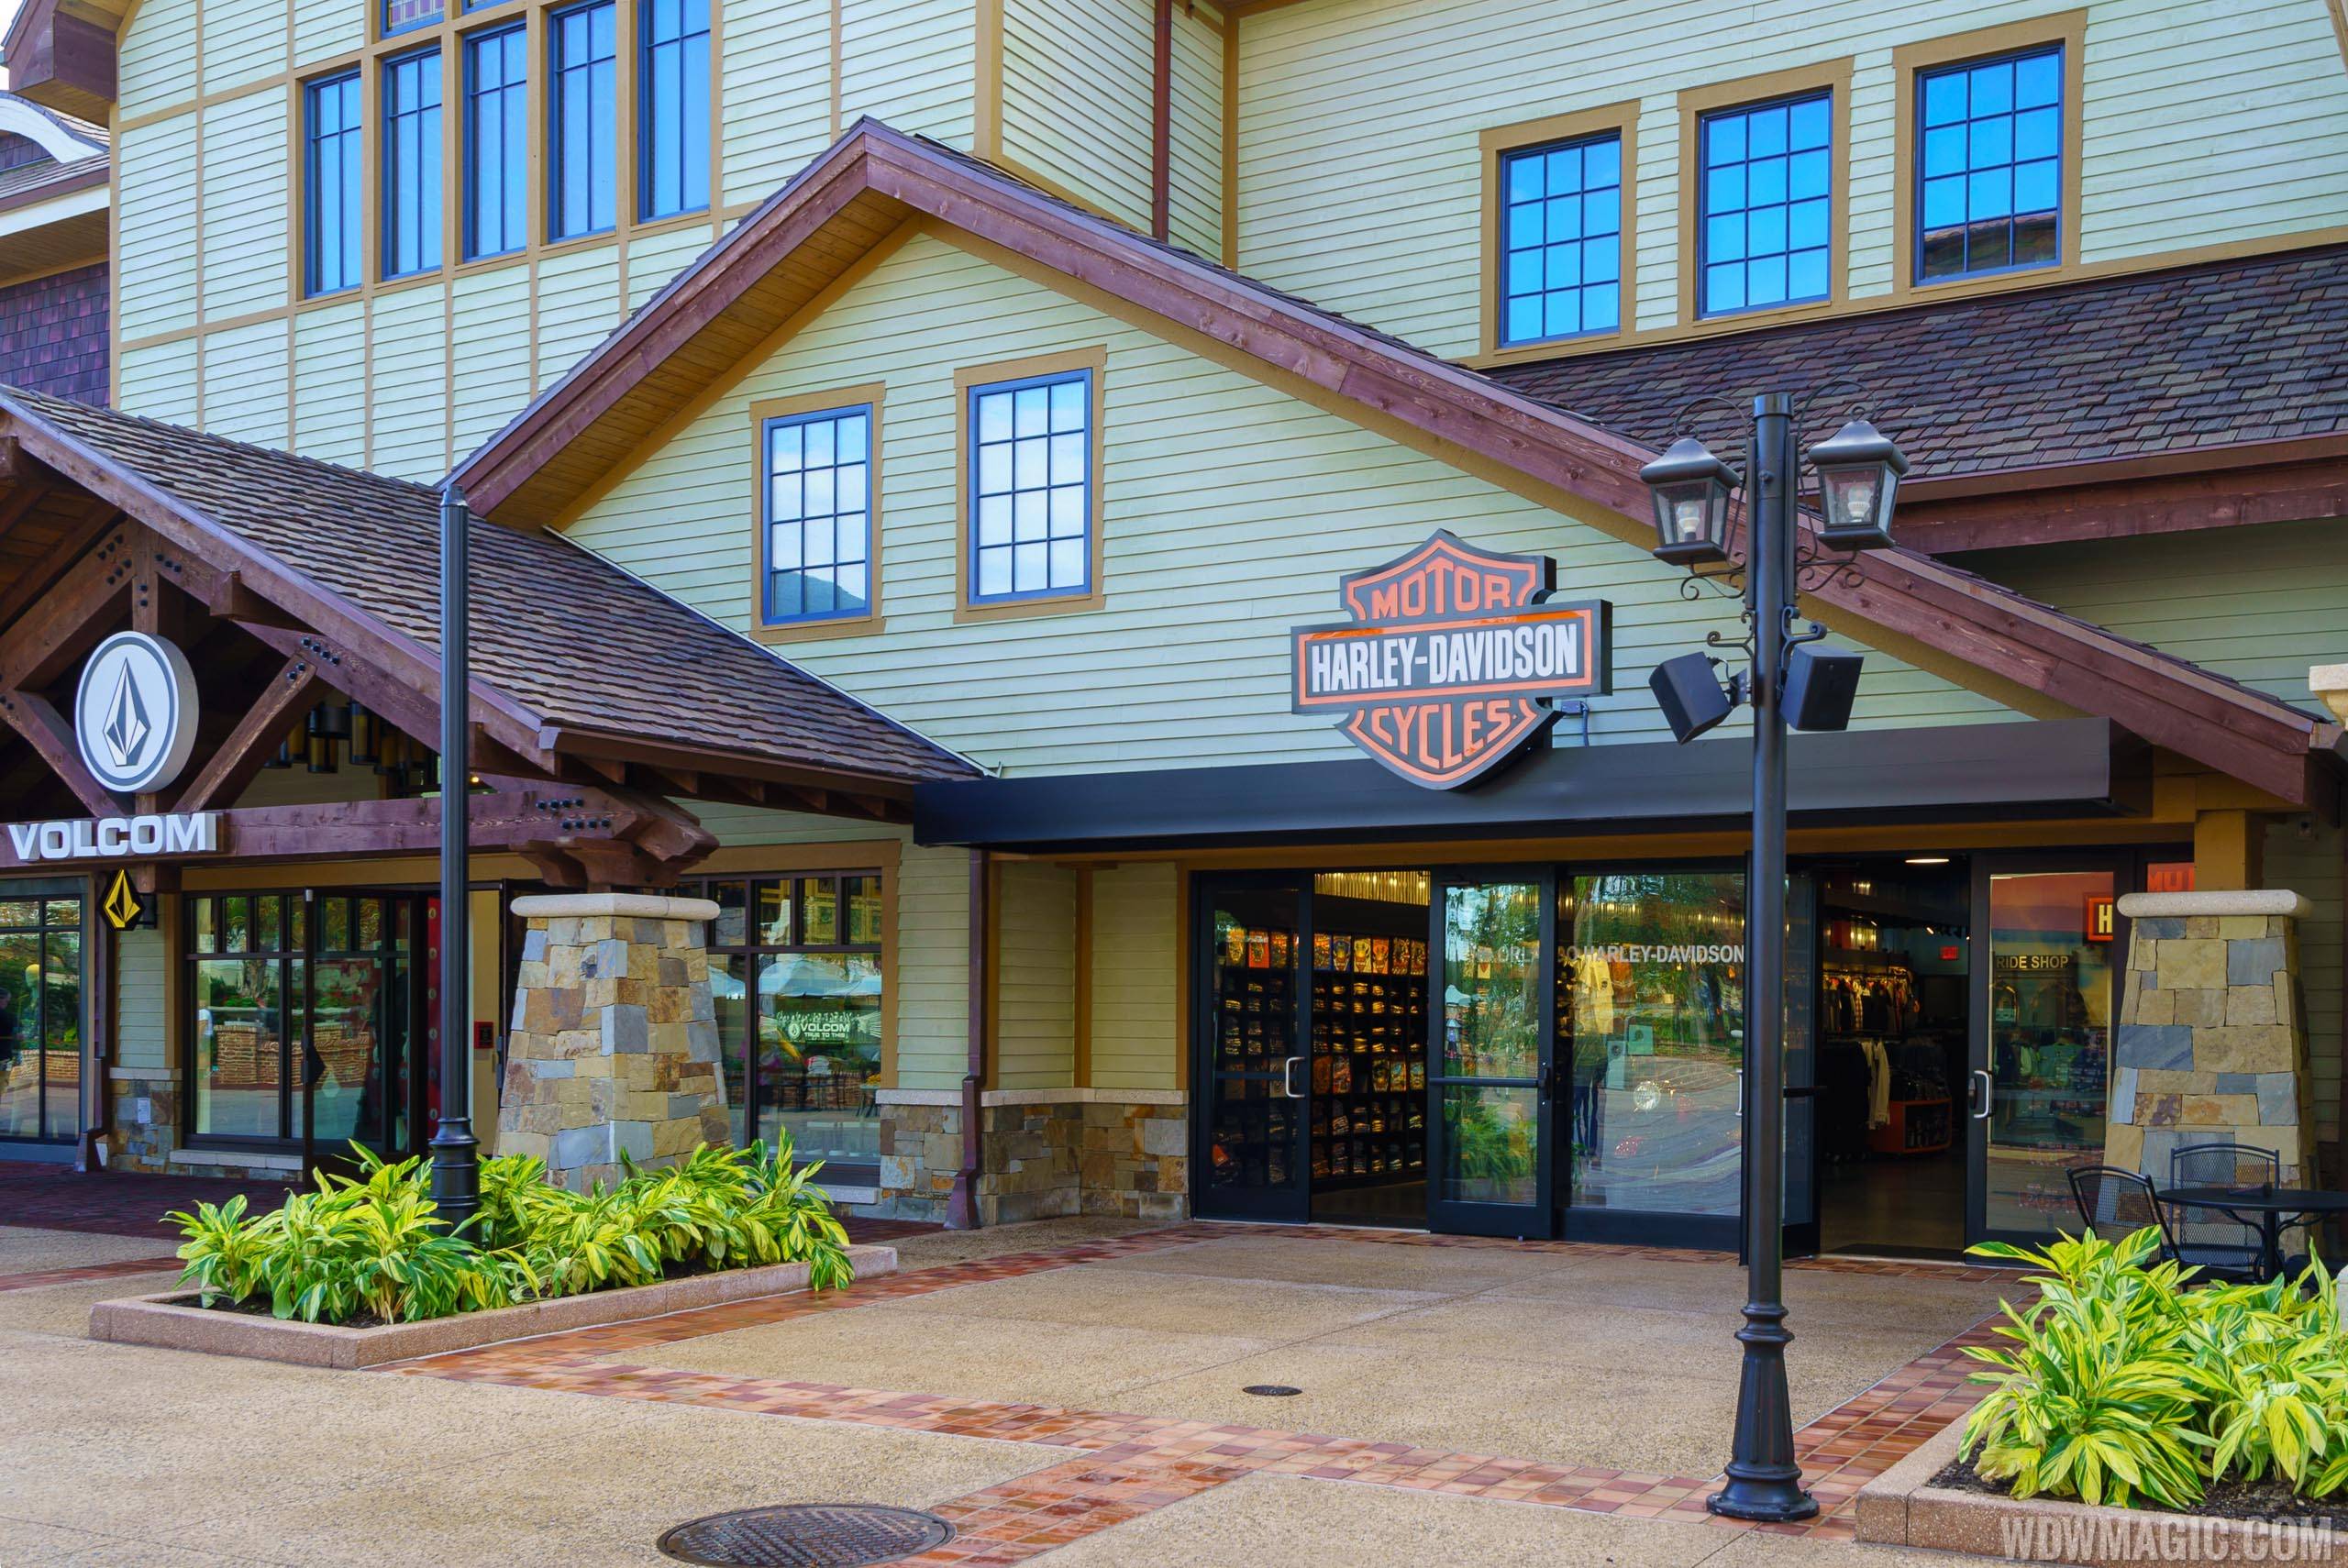 PHOTOS - Harley-Davidson Motor Cycles opens in new location at the Town Center in Disney Springs